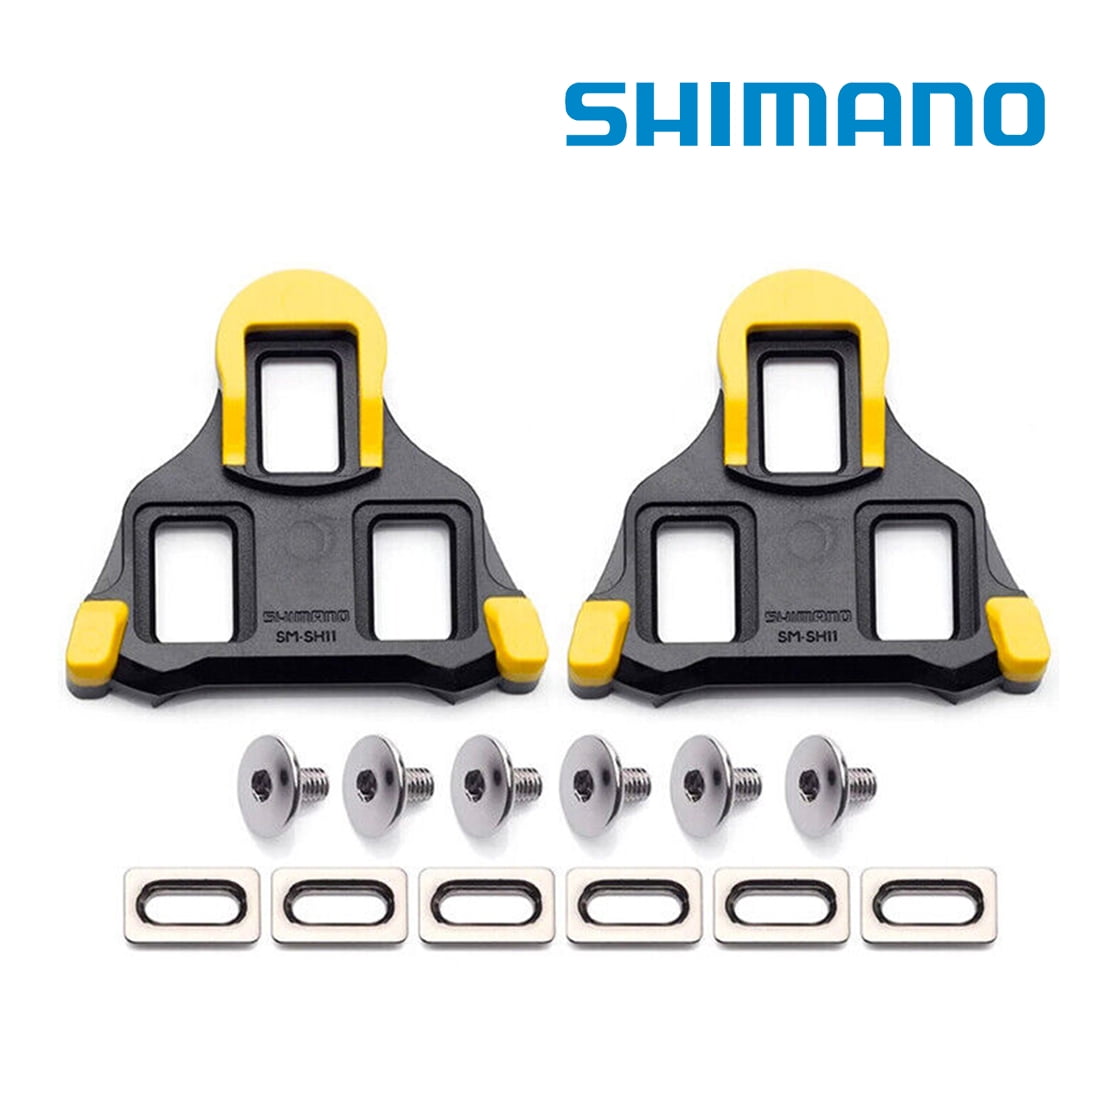 Self-locking Cycling Pedal Road Bicycle Cleat For Shimano SM-SH11 SPD-SL V